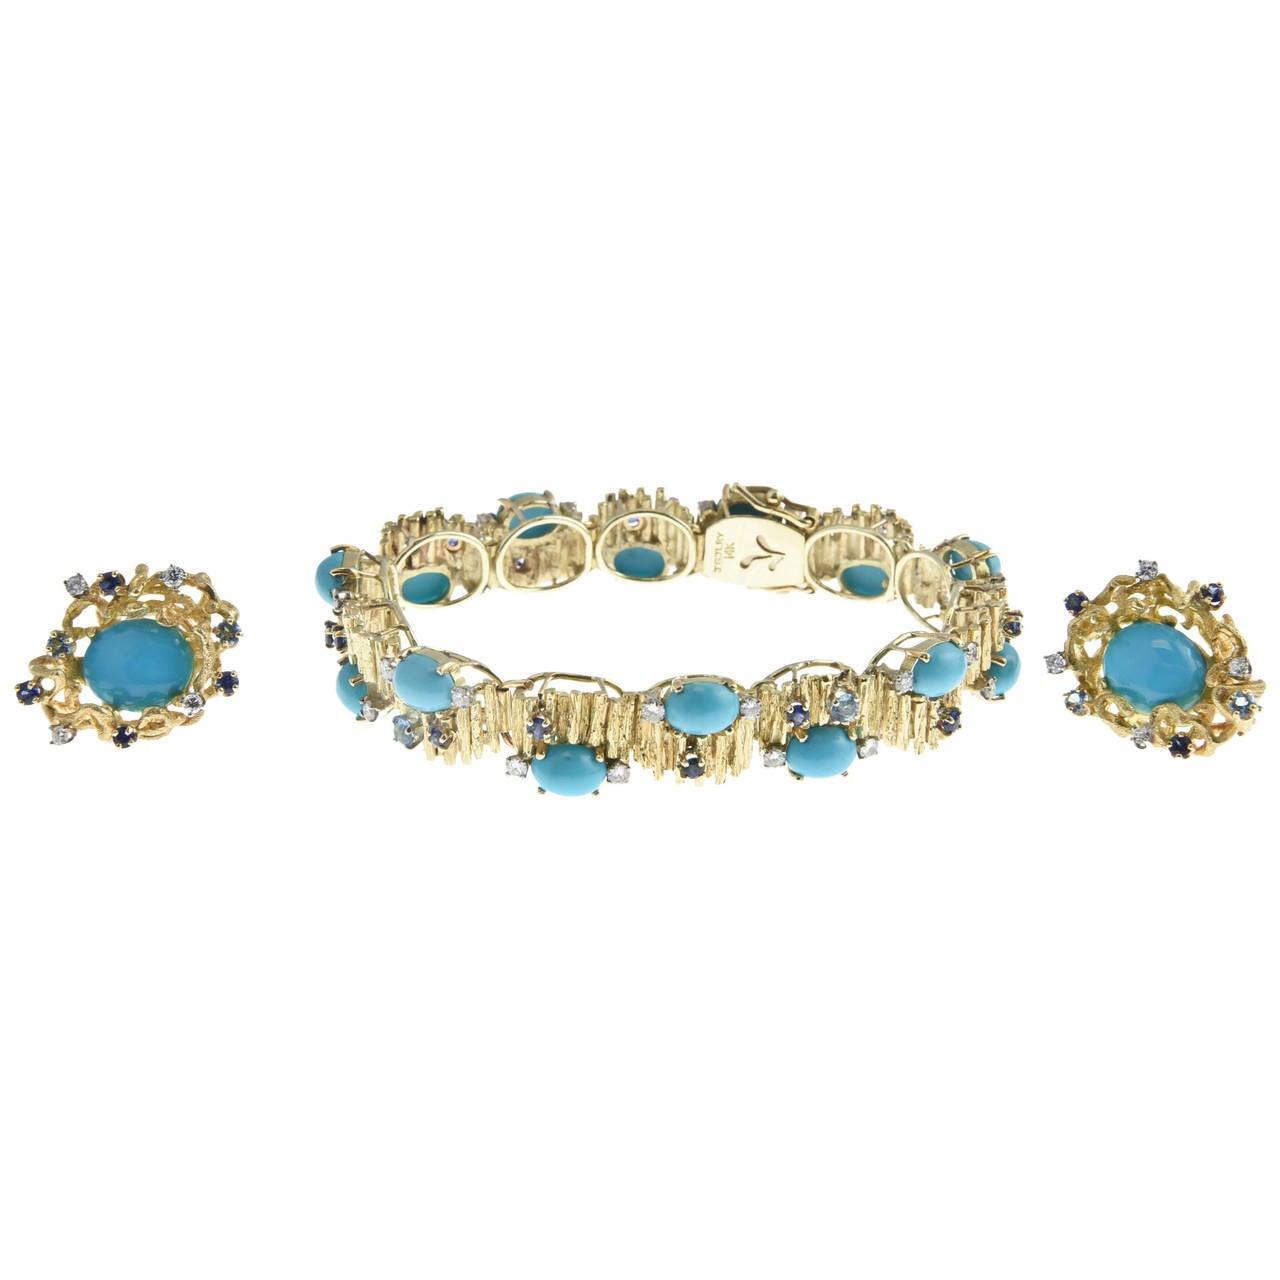 1960s Turquoise, Sapphire, Diamond and Topaz Gold Bracelet and Earrings